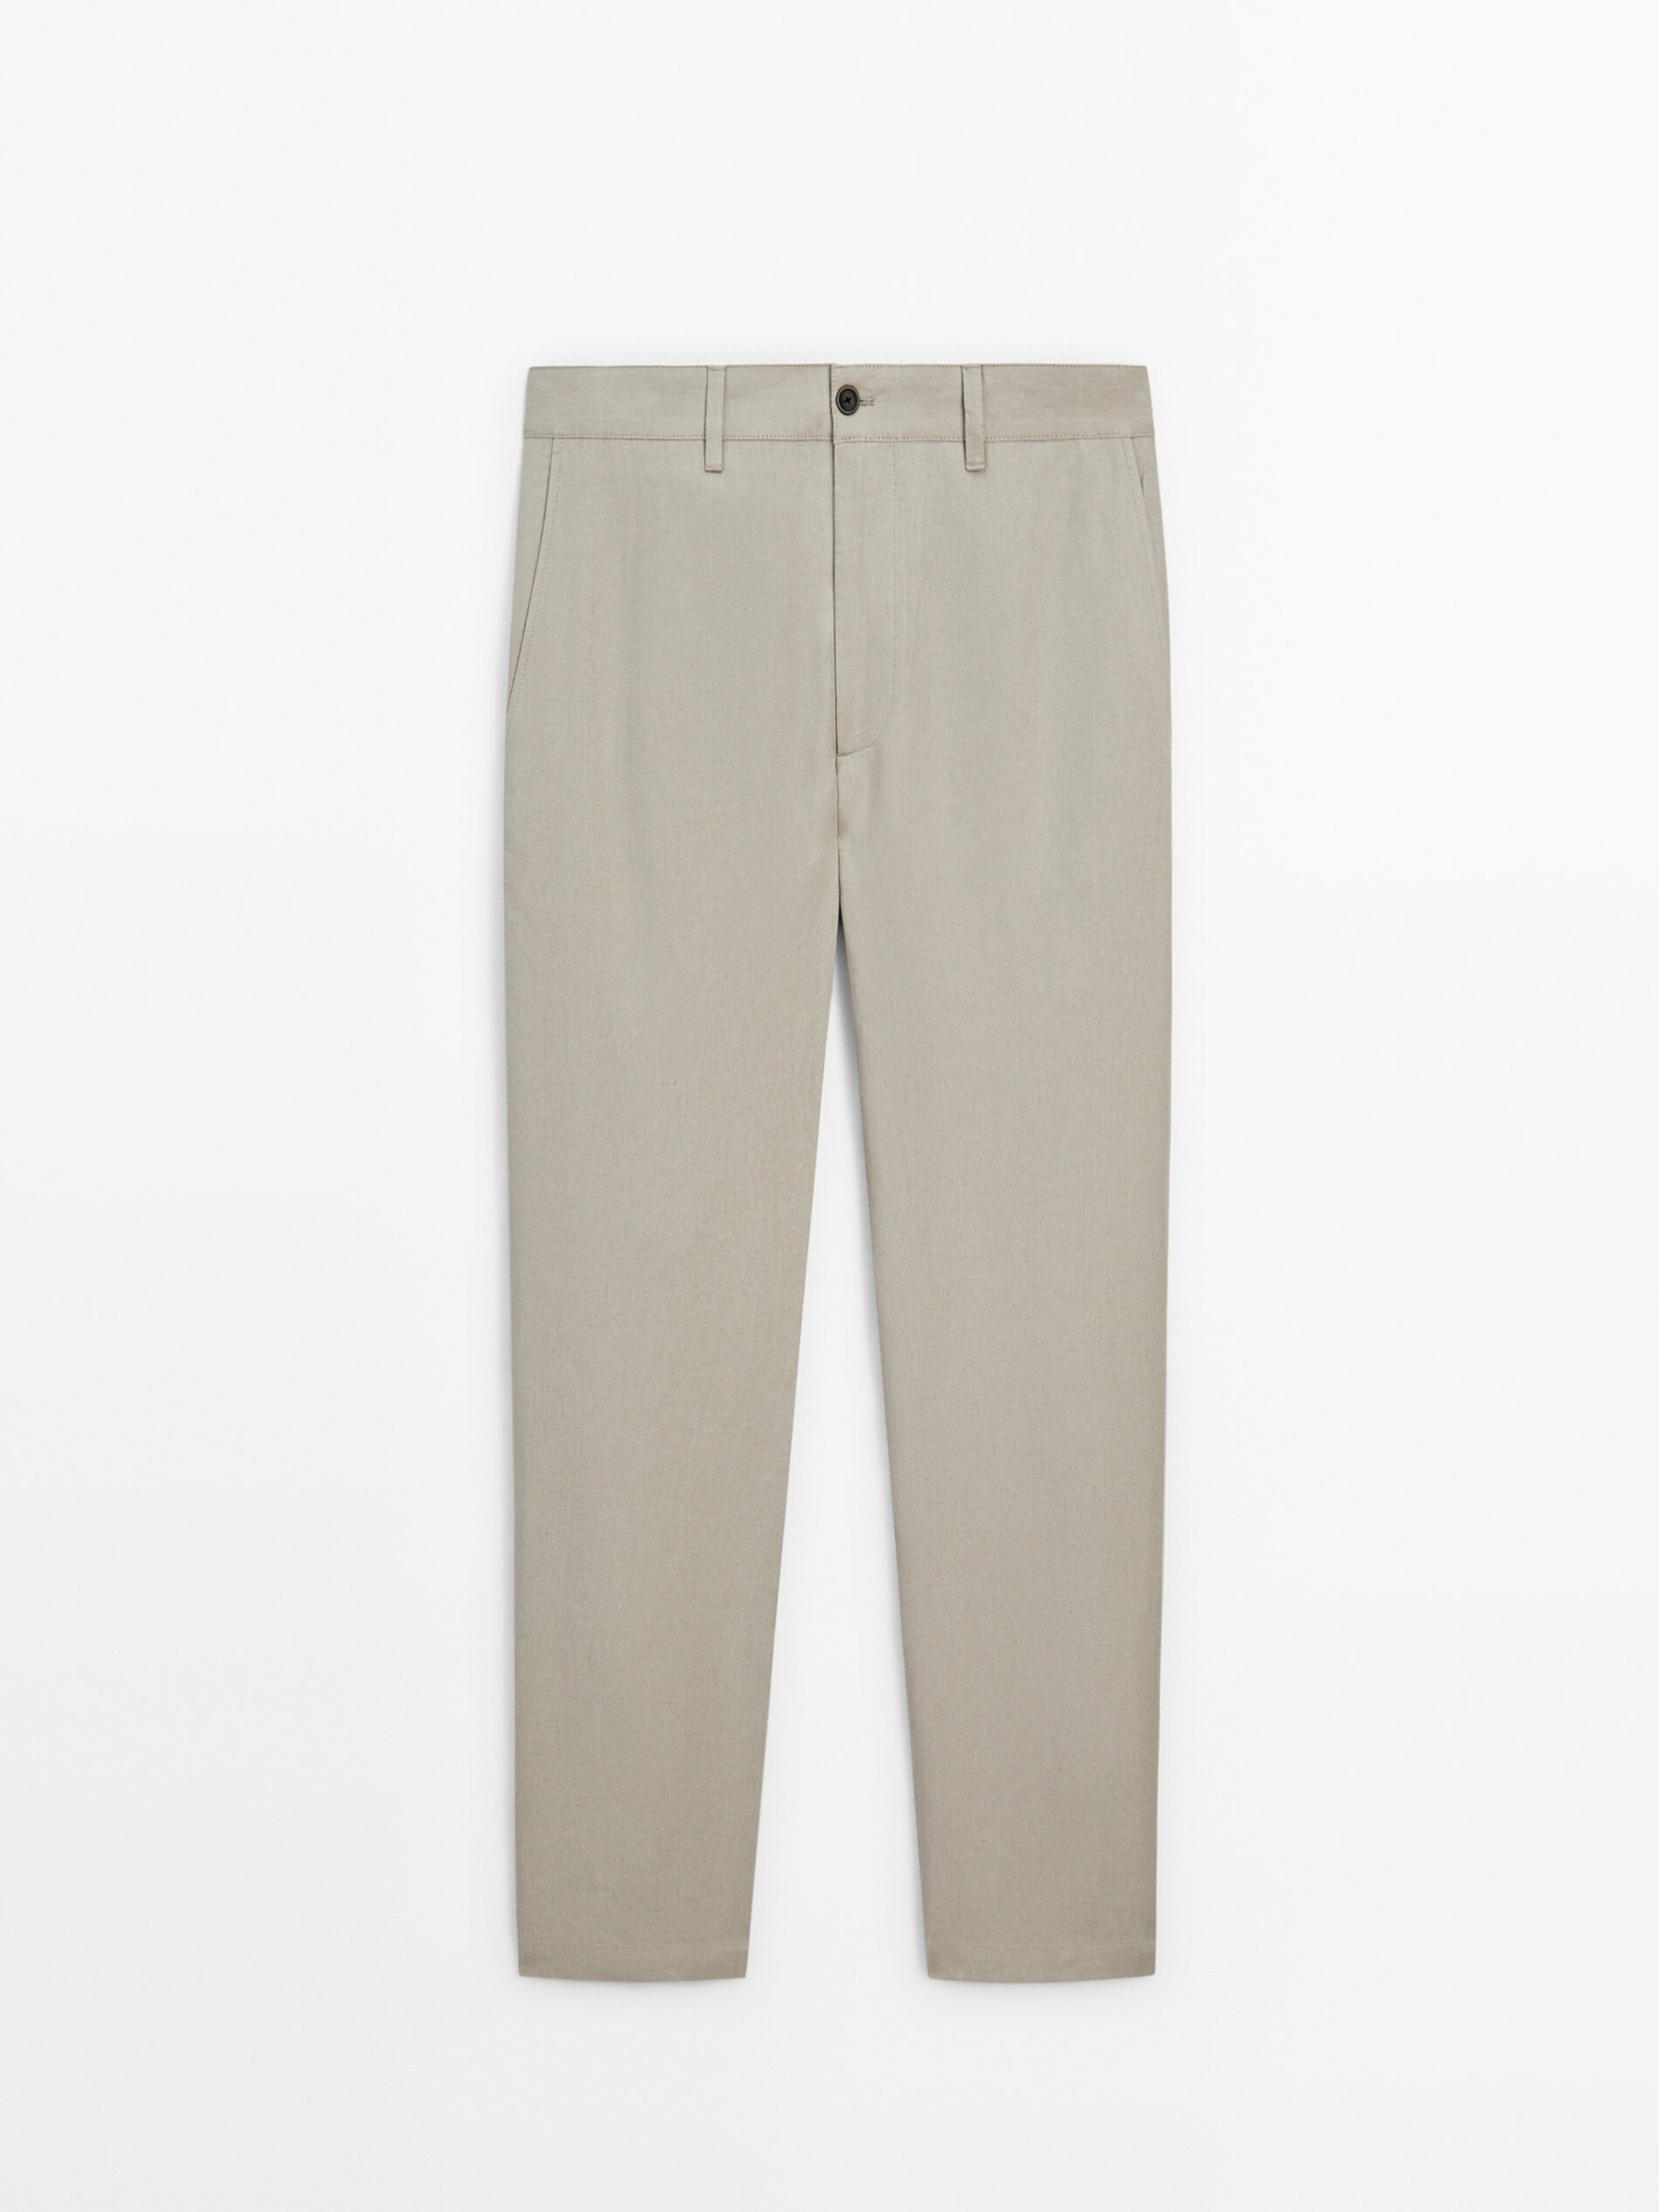 RELAXED FIT LINEN TROUSERS - LIMITED EDITION